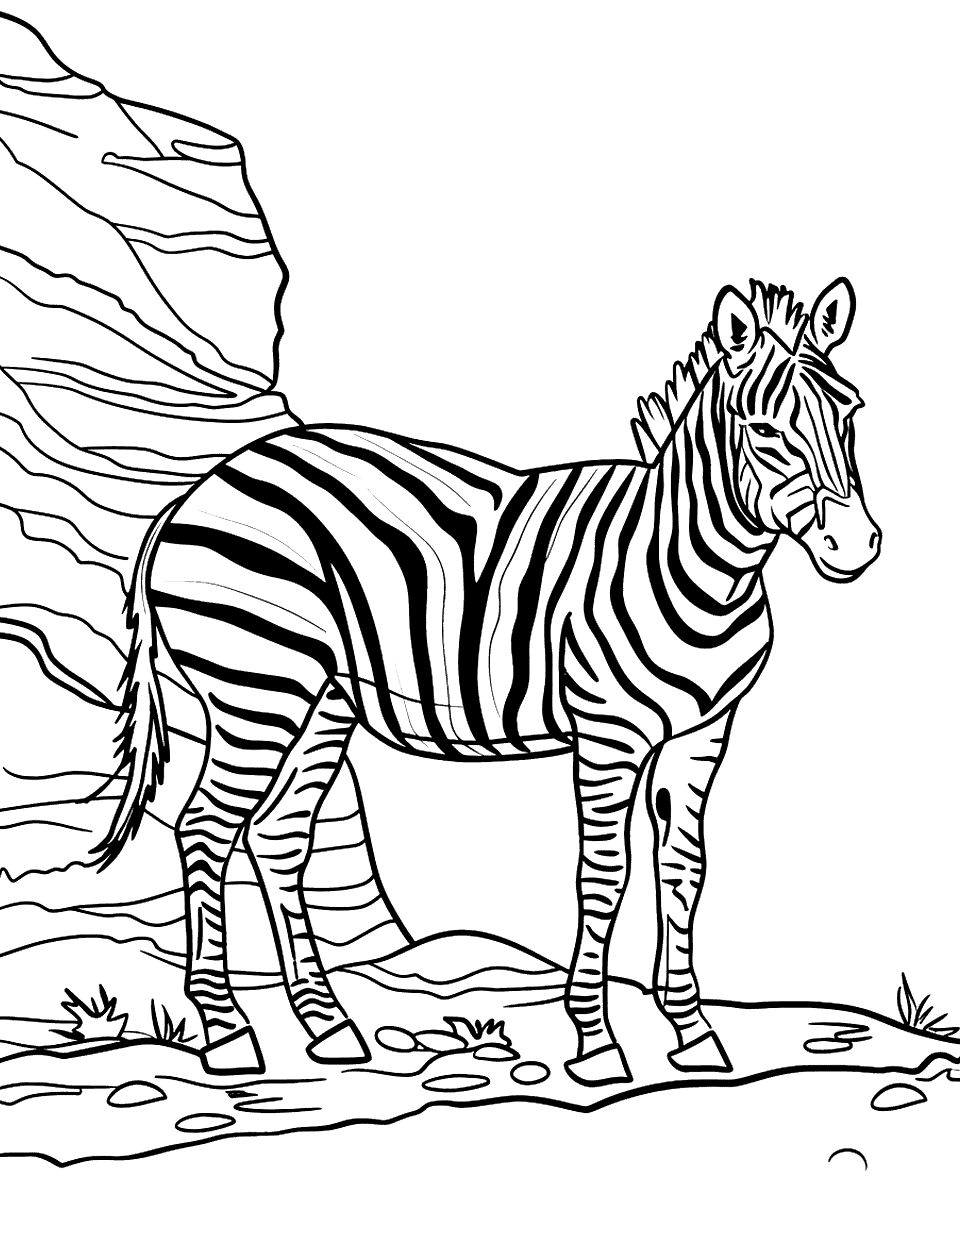 Zebra by the Mountain Coloring Page - A mountain zebra standing at the base of a rocky outcrop.